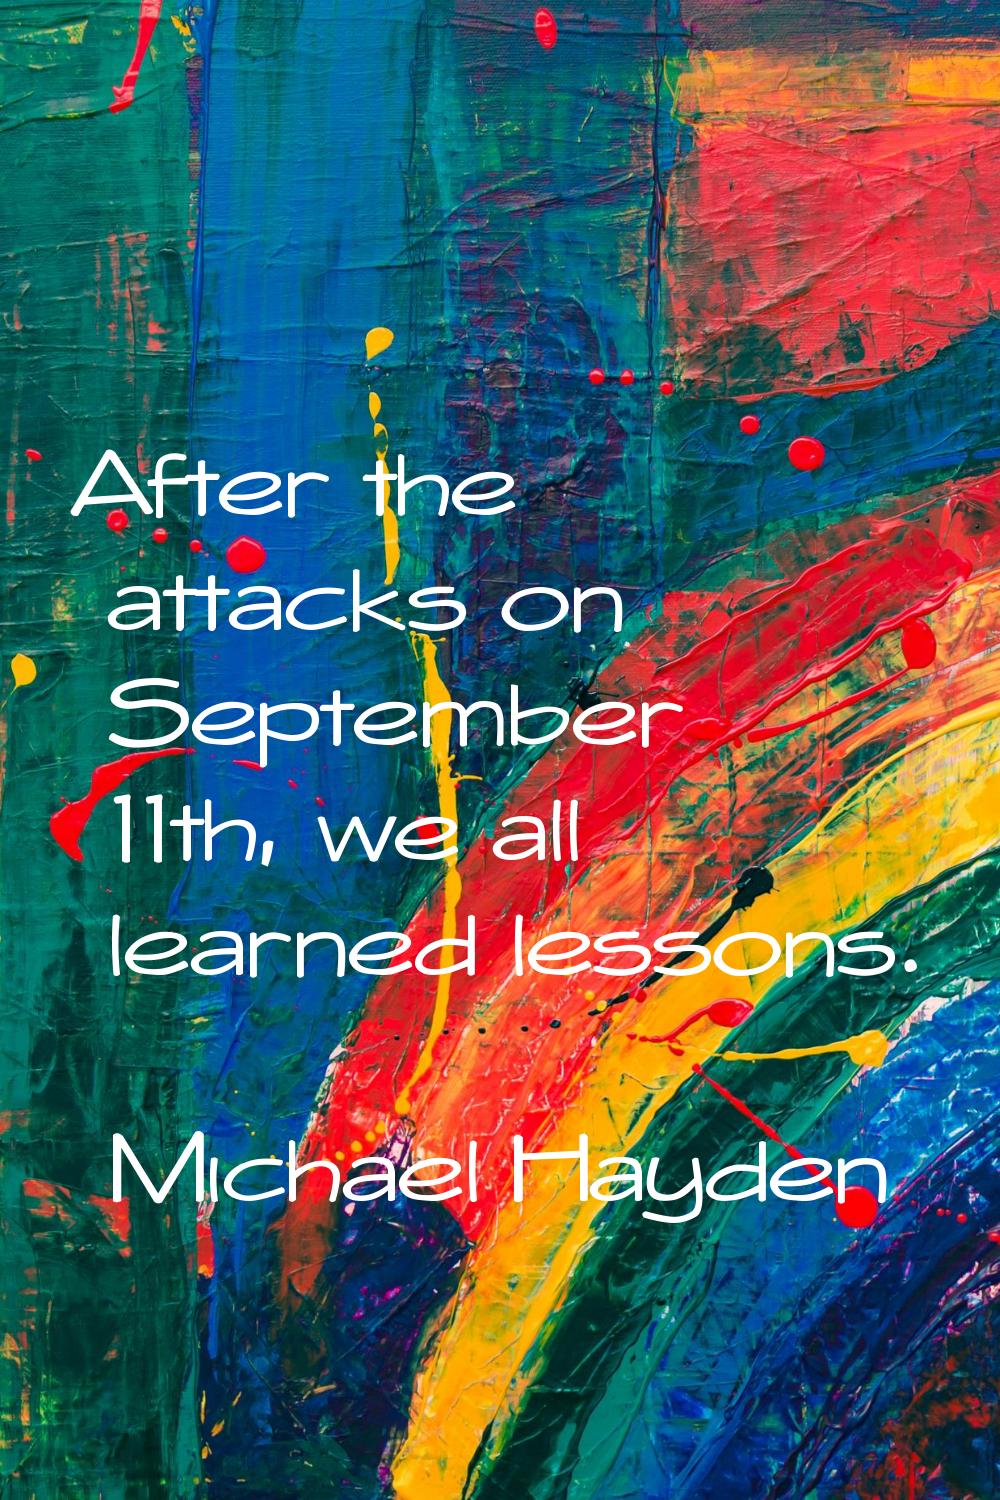 After the attacks on September 11th, we all learned lessons.